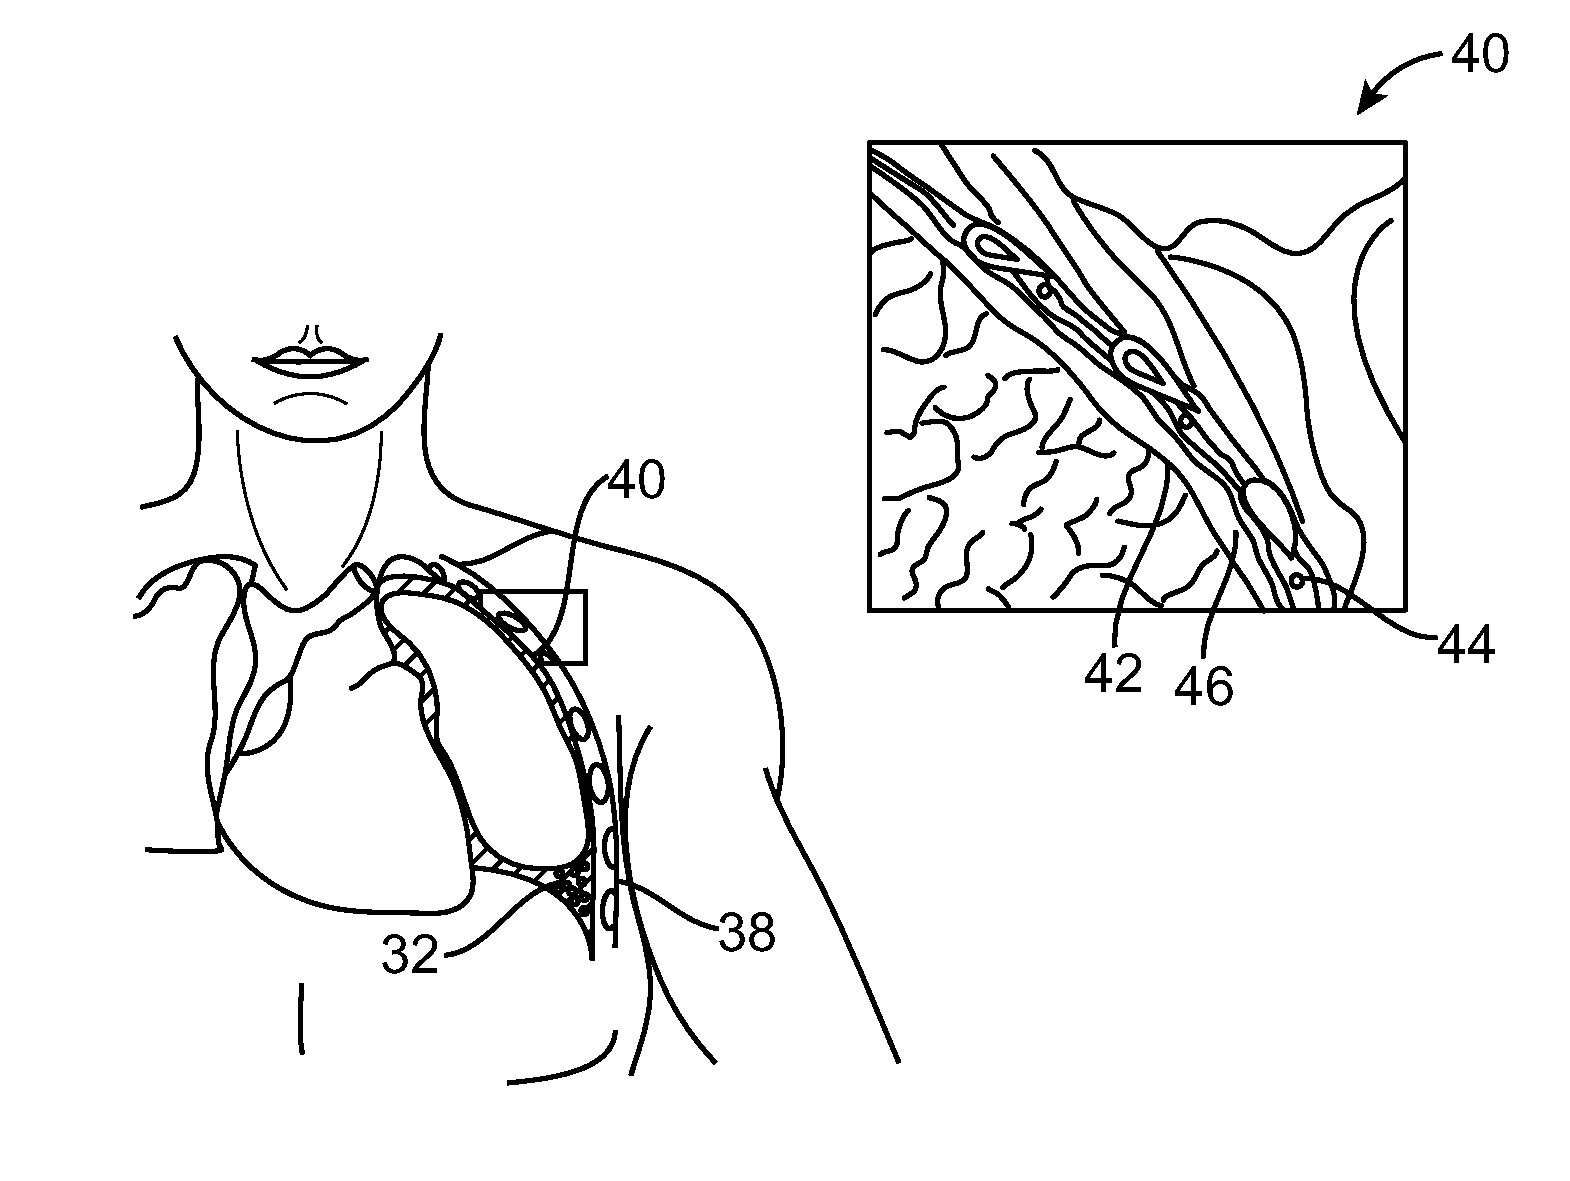 Lung Volume Reduction Devices, Methods, and Systems